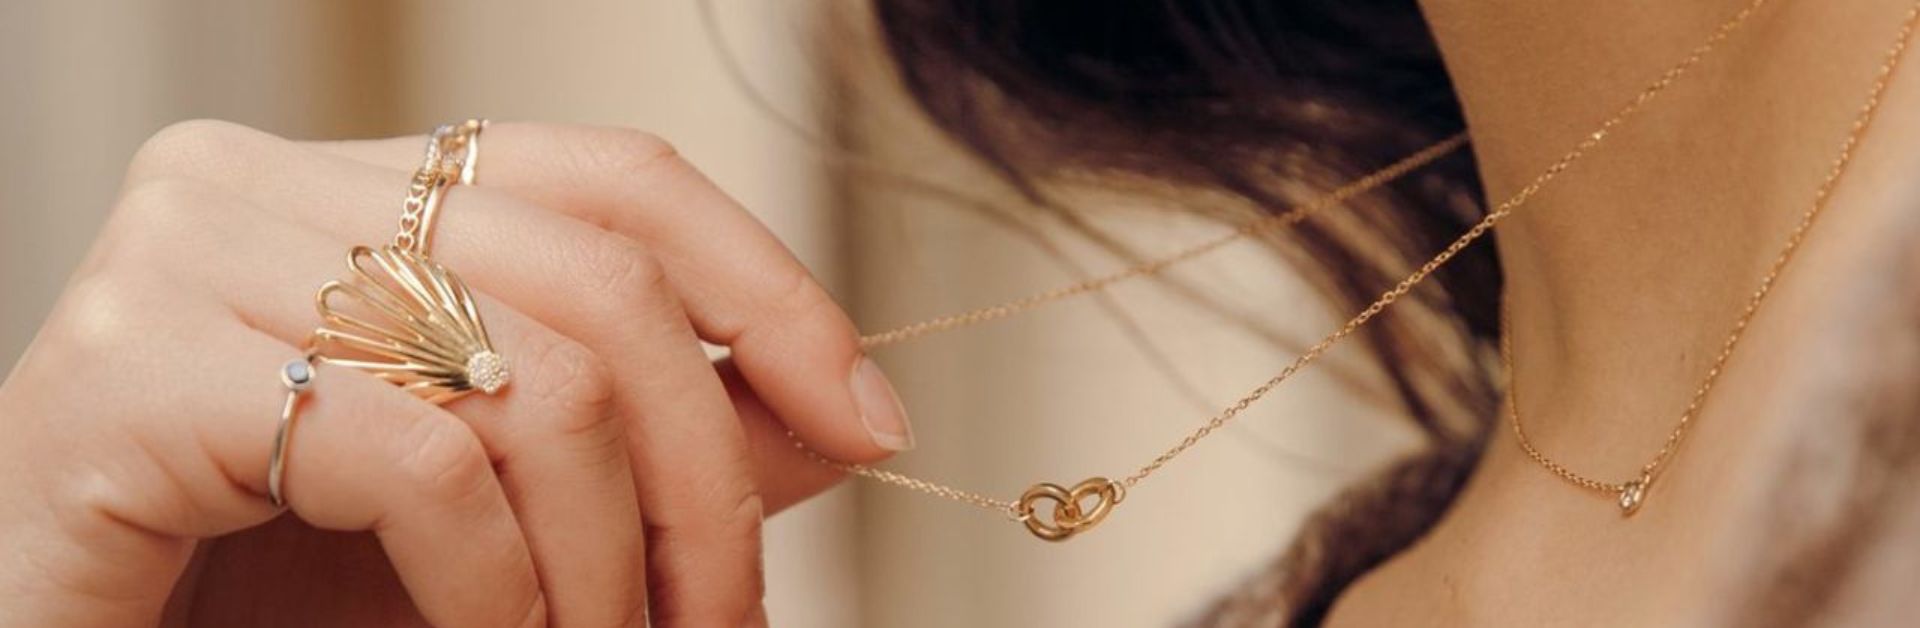 Get jewelry gift ideas to gift your mother this Mother’s Day